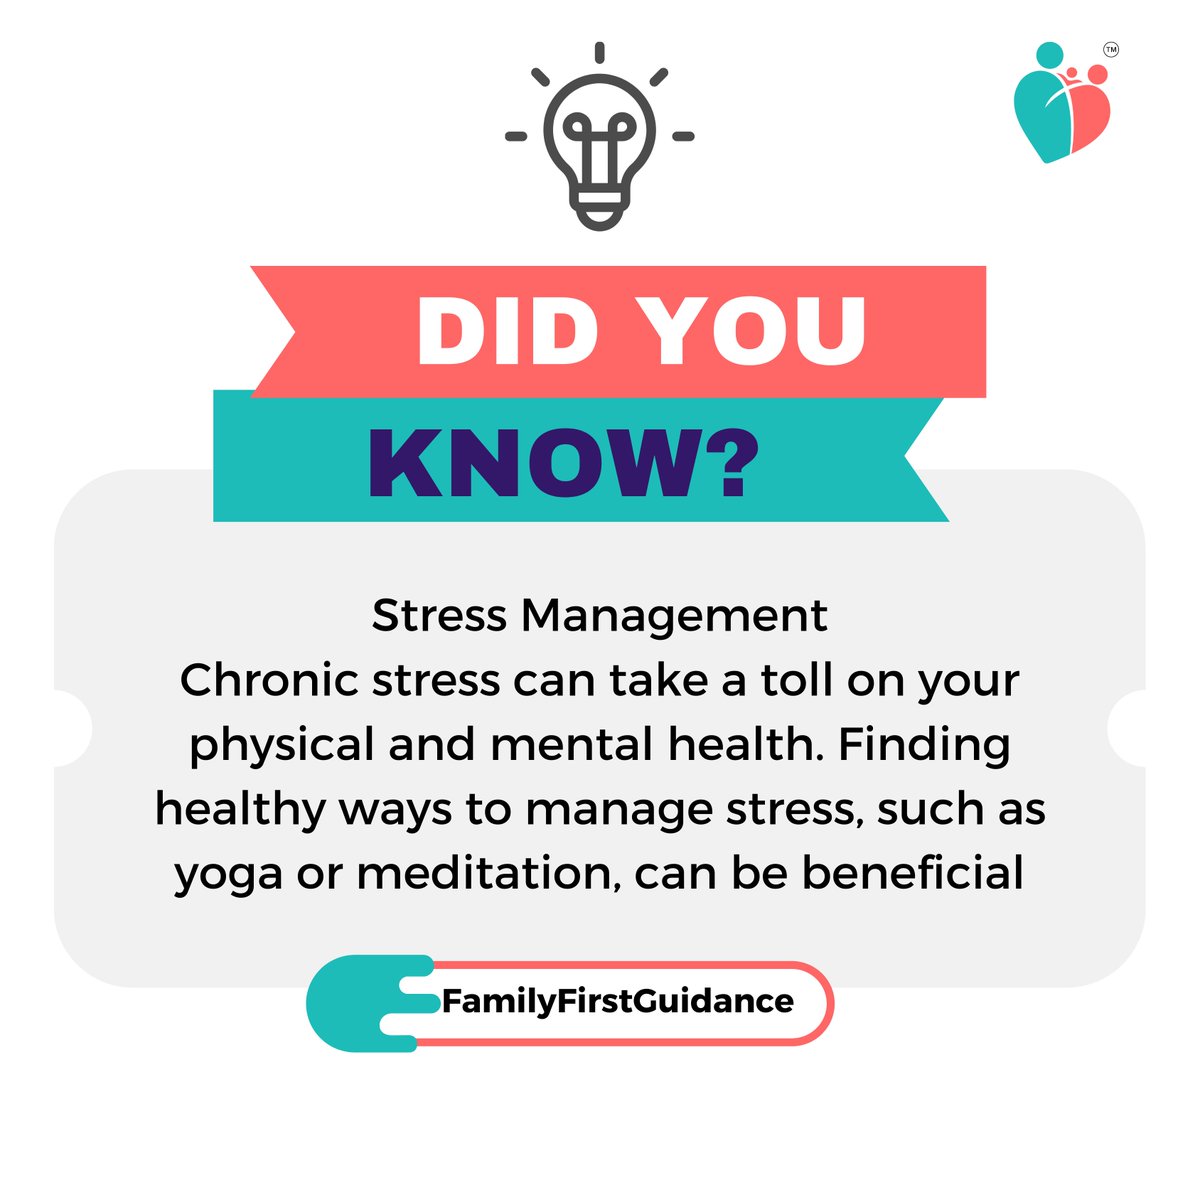 Did you know? #FunFact #knowledgeispower

#familyfirstguidancecentre #mumbai #communitycentre
#jamamasjidmumbai #counsellingservices
#counsellingcentre